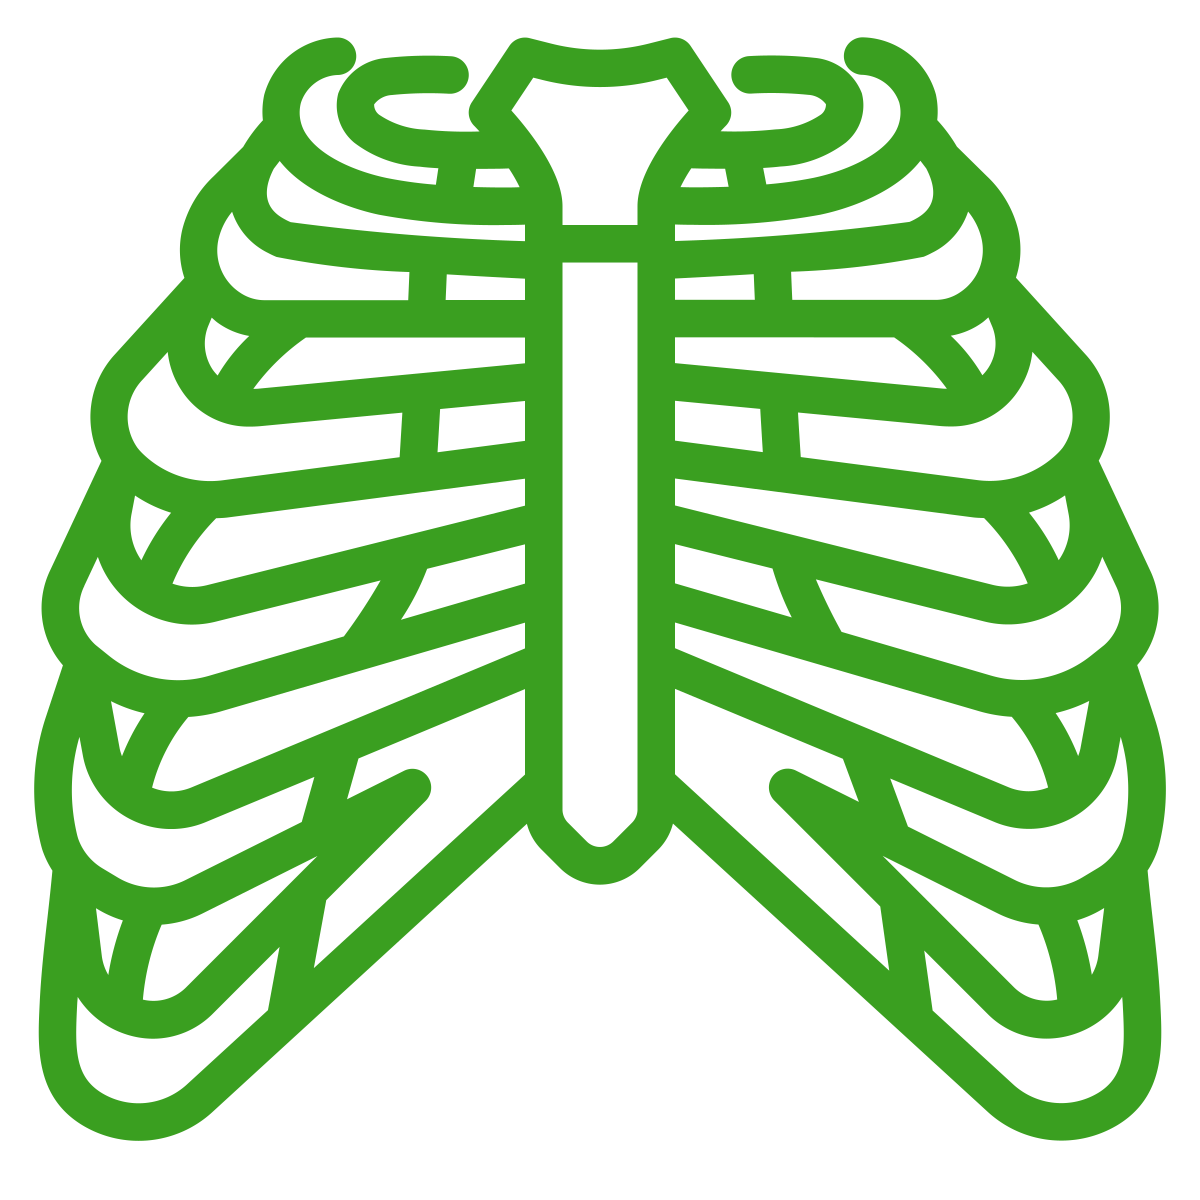 An outline of a ribcage | Featured image for Thoracic Outlet Syndrome.